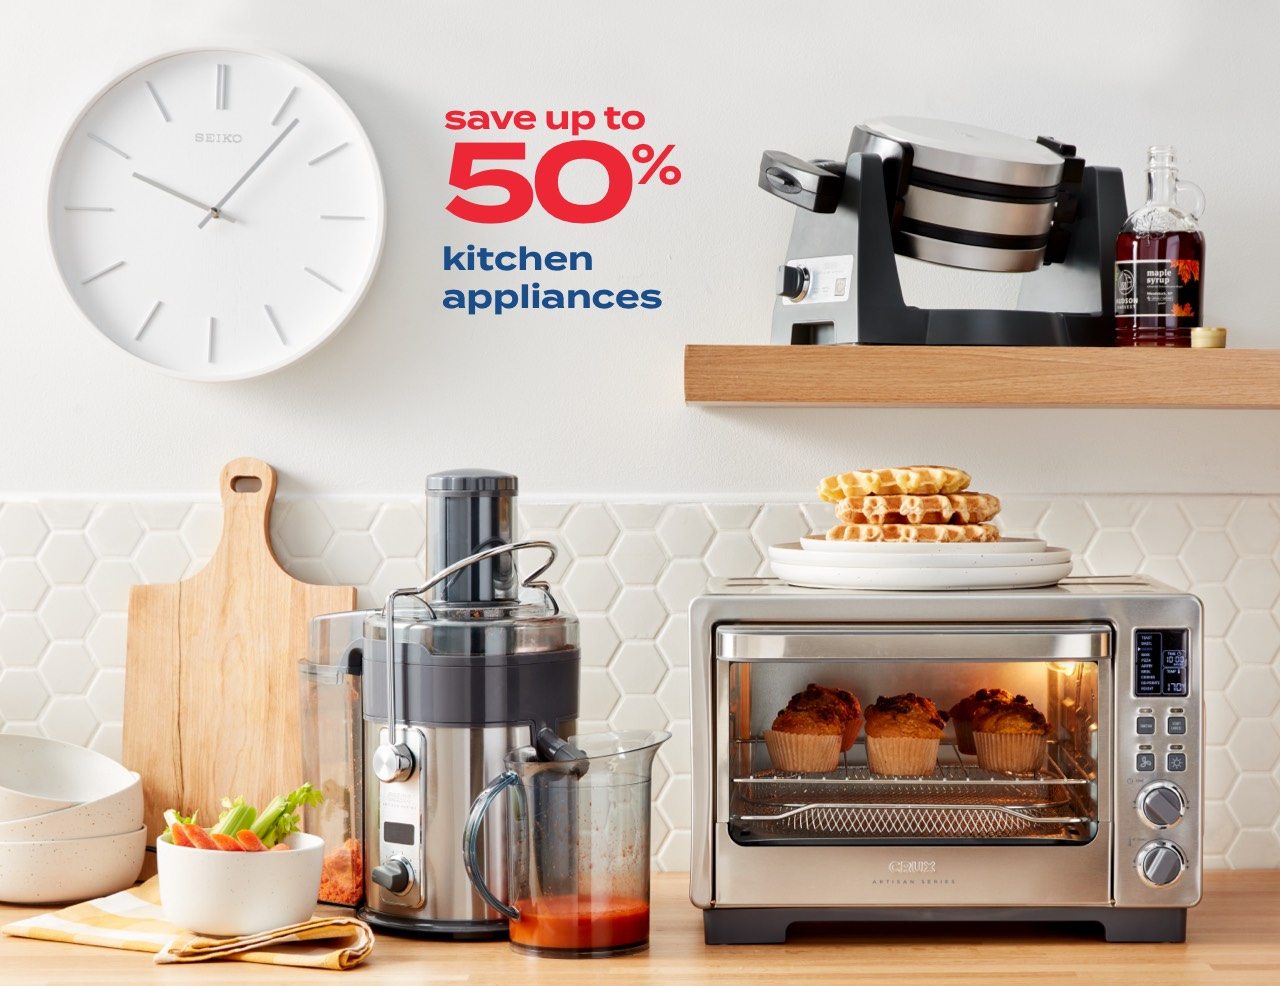 save up to 50% kitchen appliances 